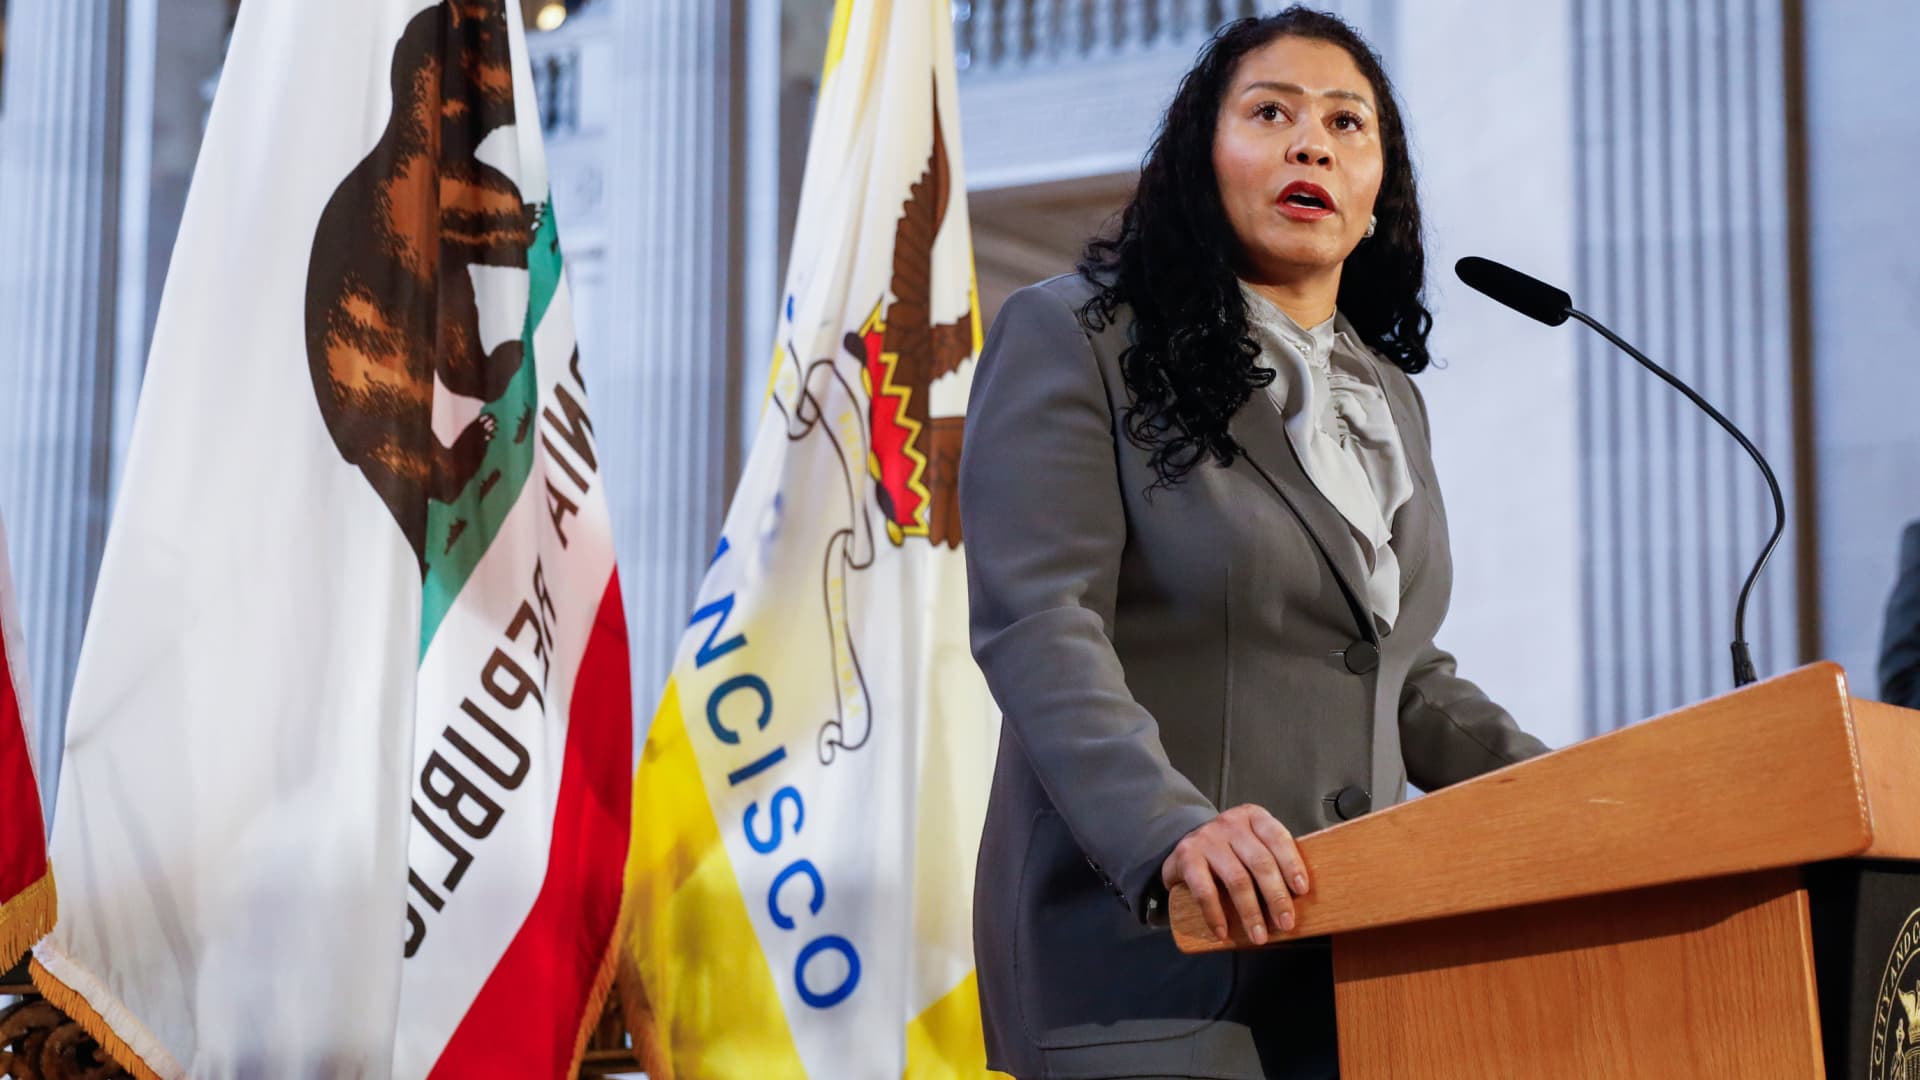 San Francisco Mayor London Breed speaks at a press conference regarding the next steps she will be taking to replace three school board members who were successfully recalled at City Hall on Wednesday, Feb. 16, 2022 in San Francisco, California.